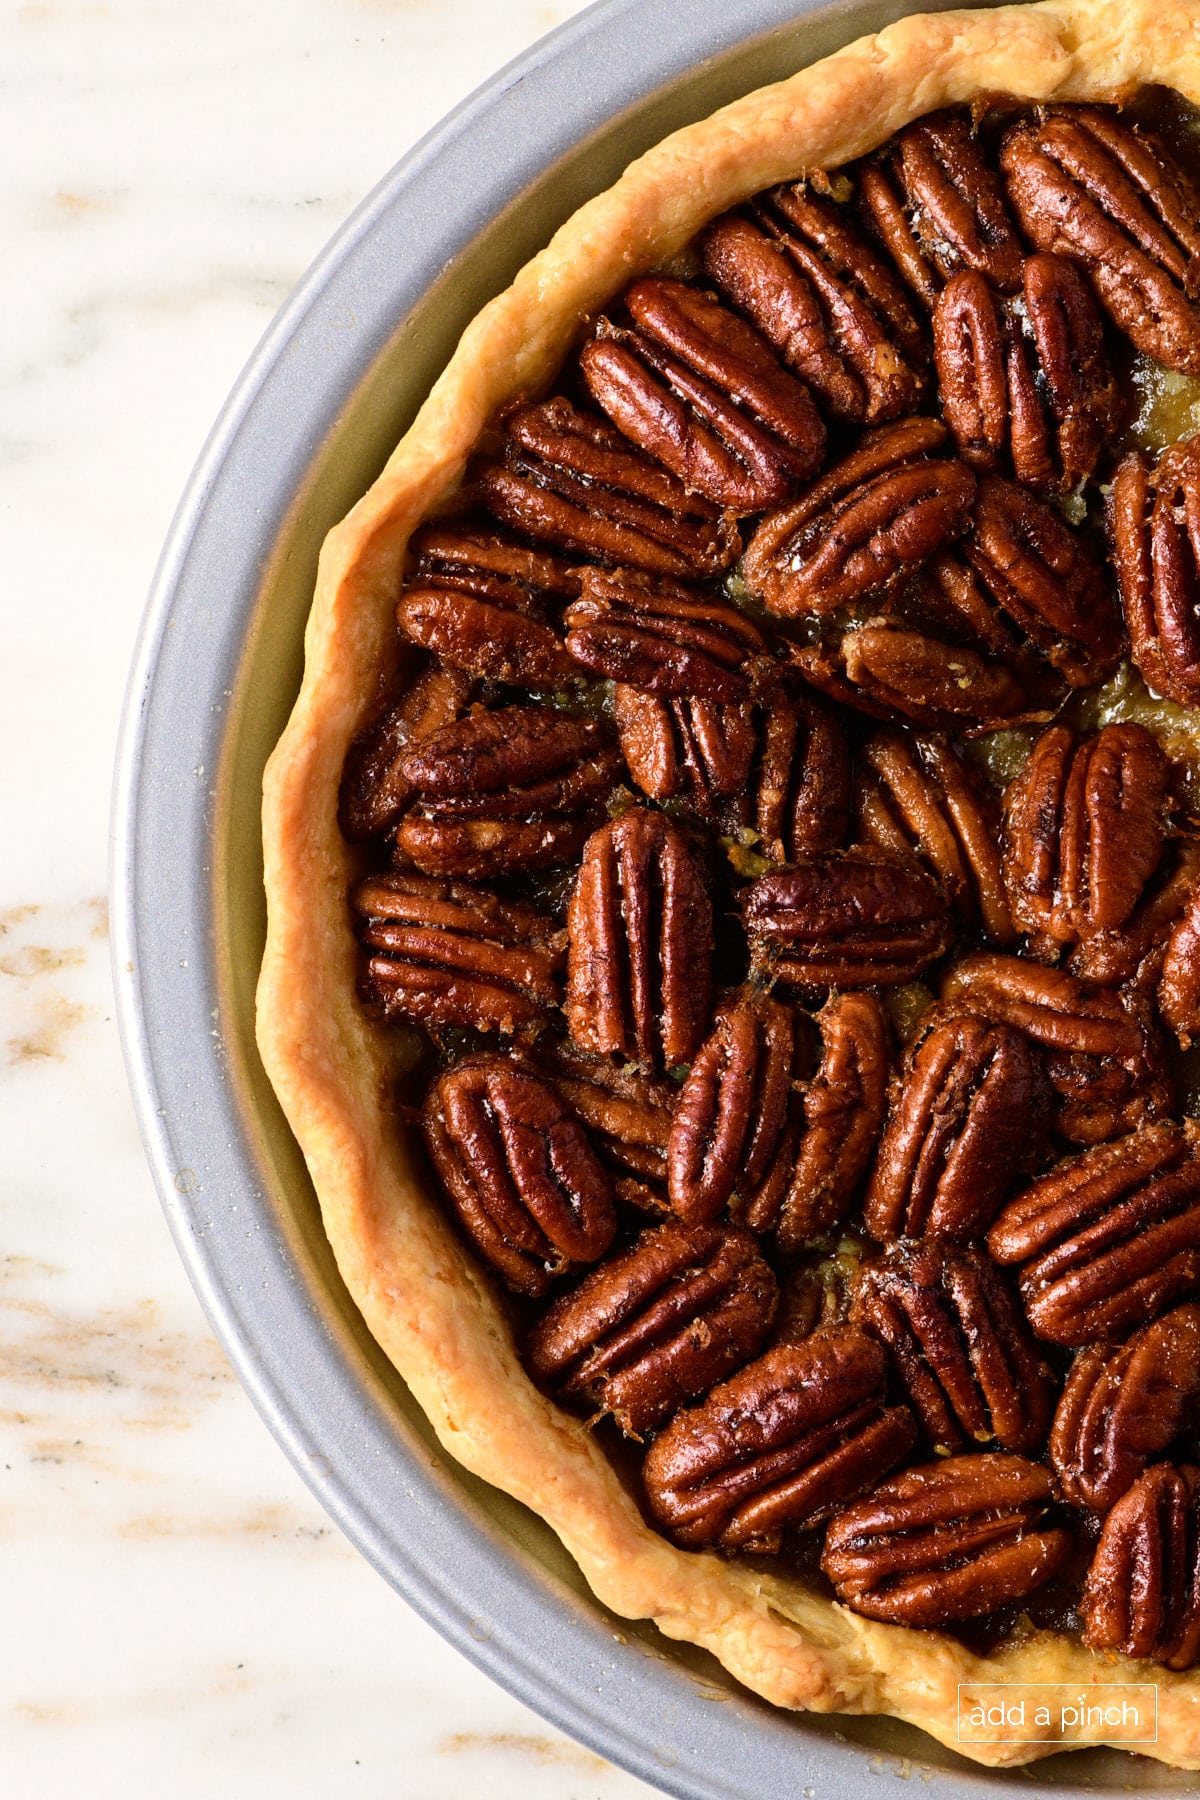 Pecan pie with golden pie crust in a pie plate on a marble counter.